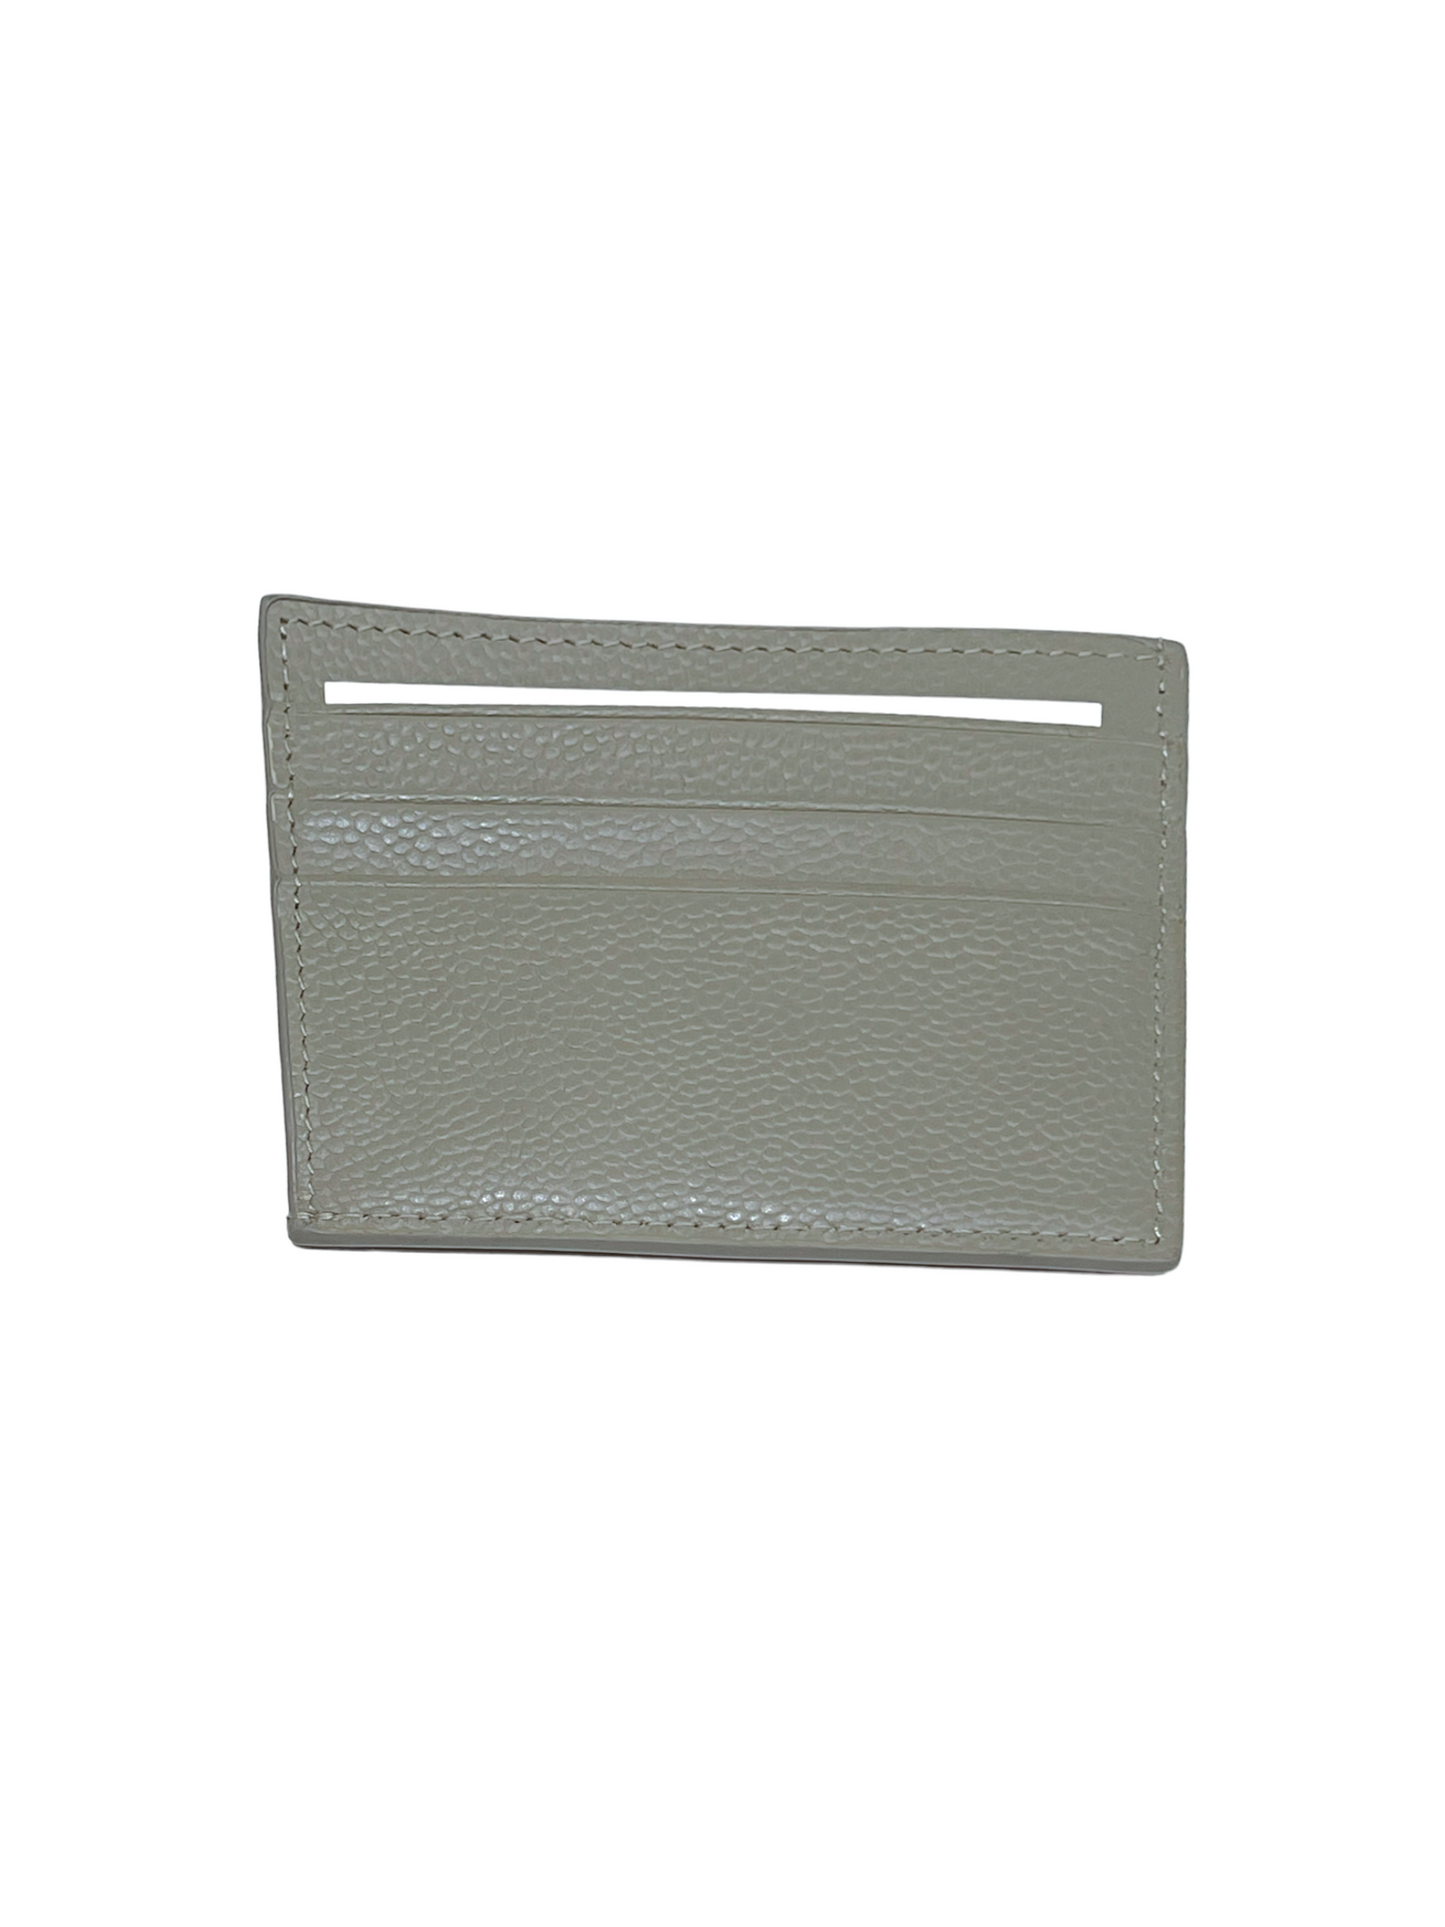 Thom Browne Grey Leather Card Holder Wallet - Genuine Design luxury consignment Calgary, Alberta, Canada New and pre-owned clothing, shoes, accessories.